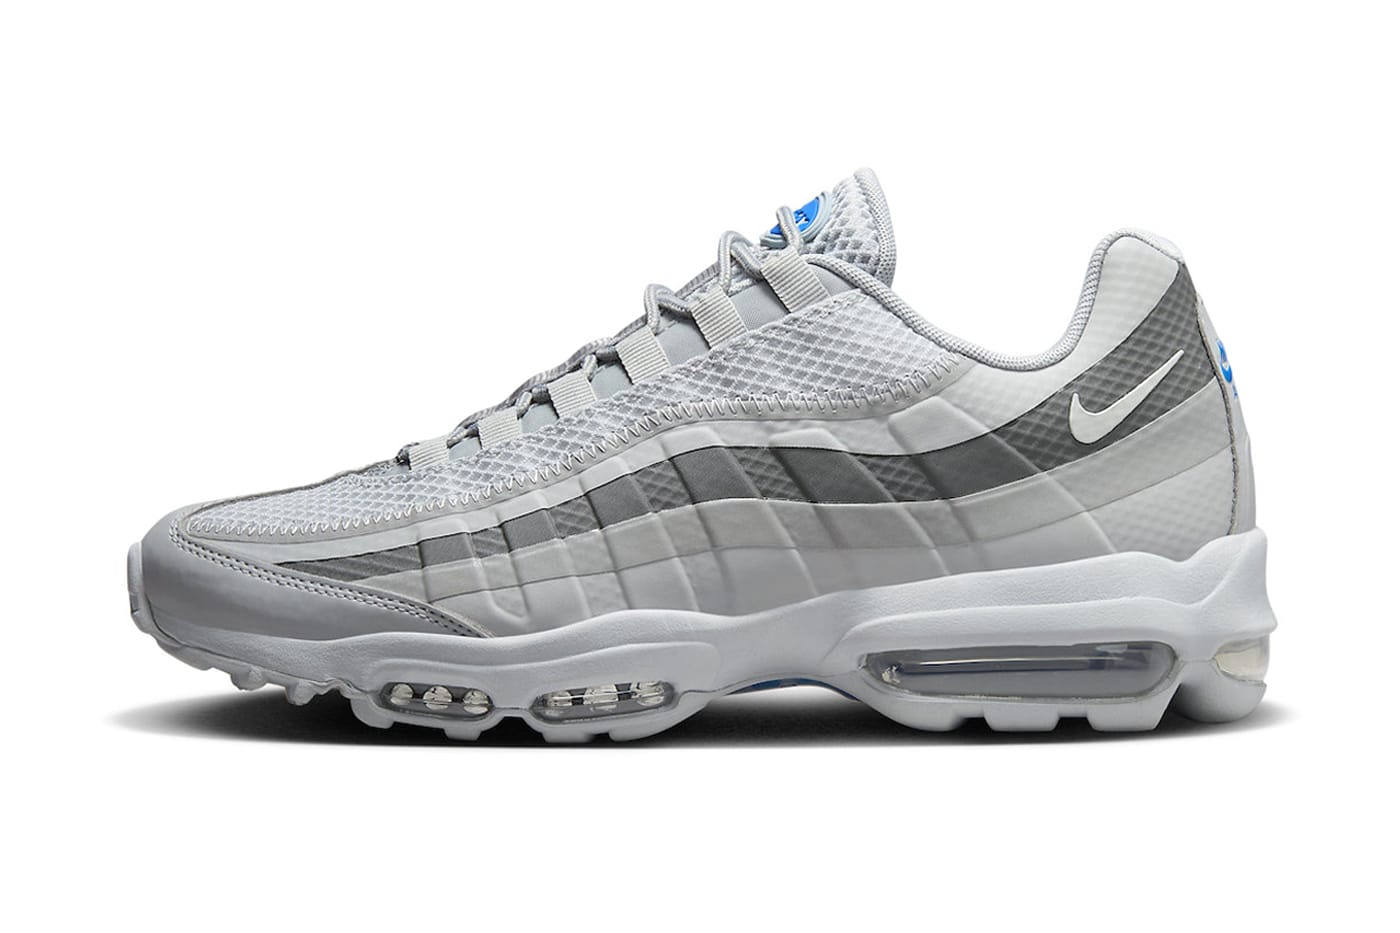 Nike Air Max 95 Ultra Surfaces in Shades of Grey | Hypebeast